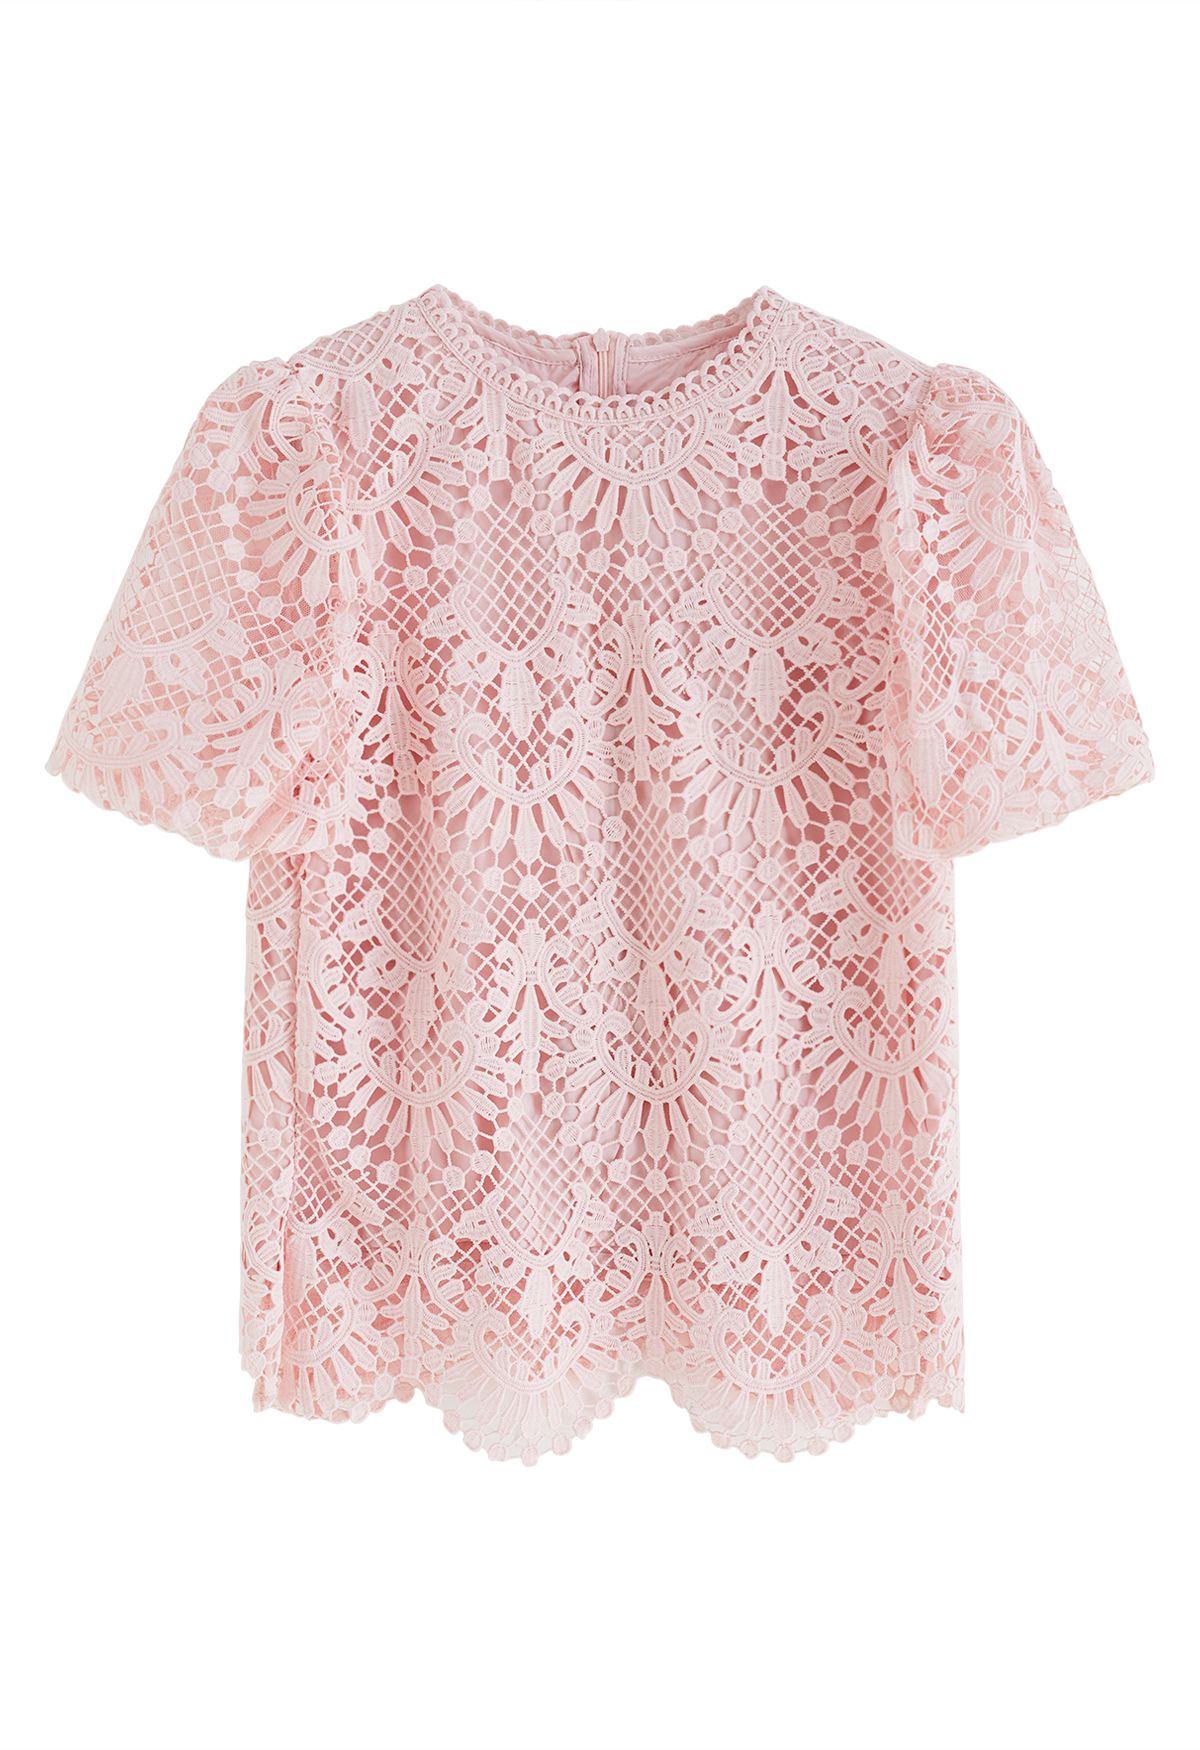 Scallop Edge Bubble Sleeve Crochet Top in Pink - Retro, Indie and ...